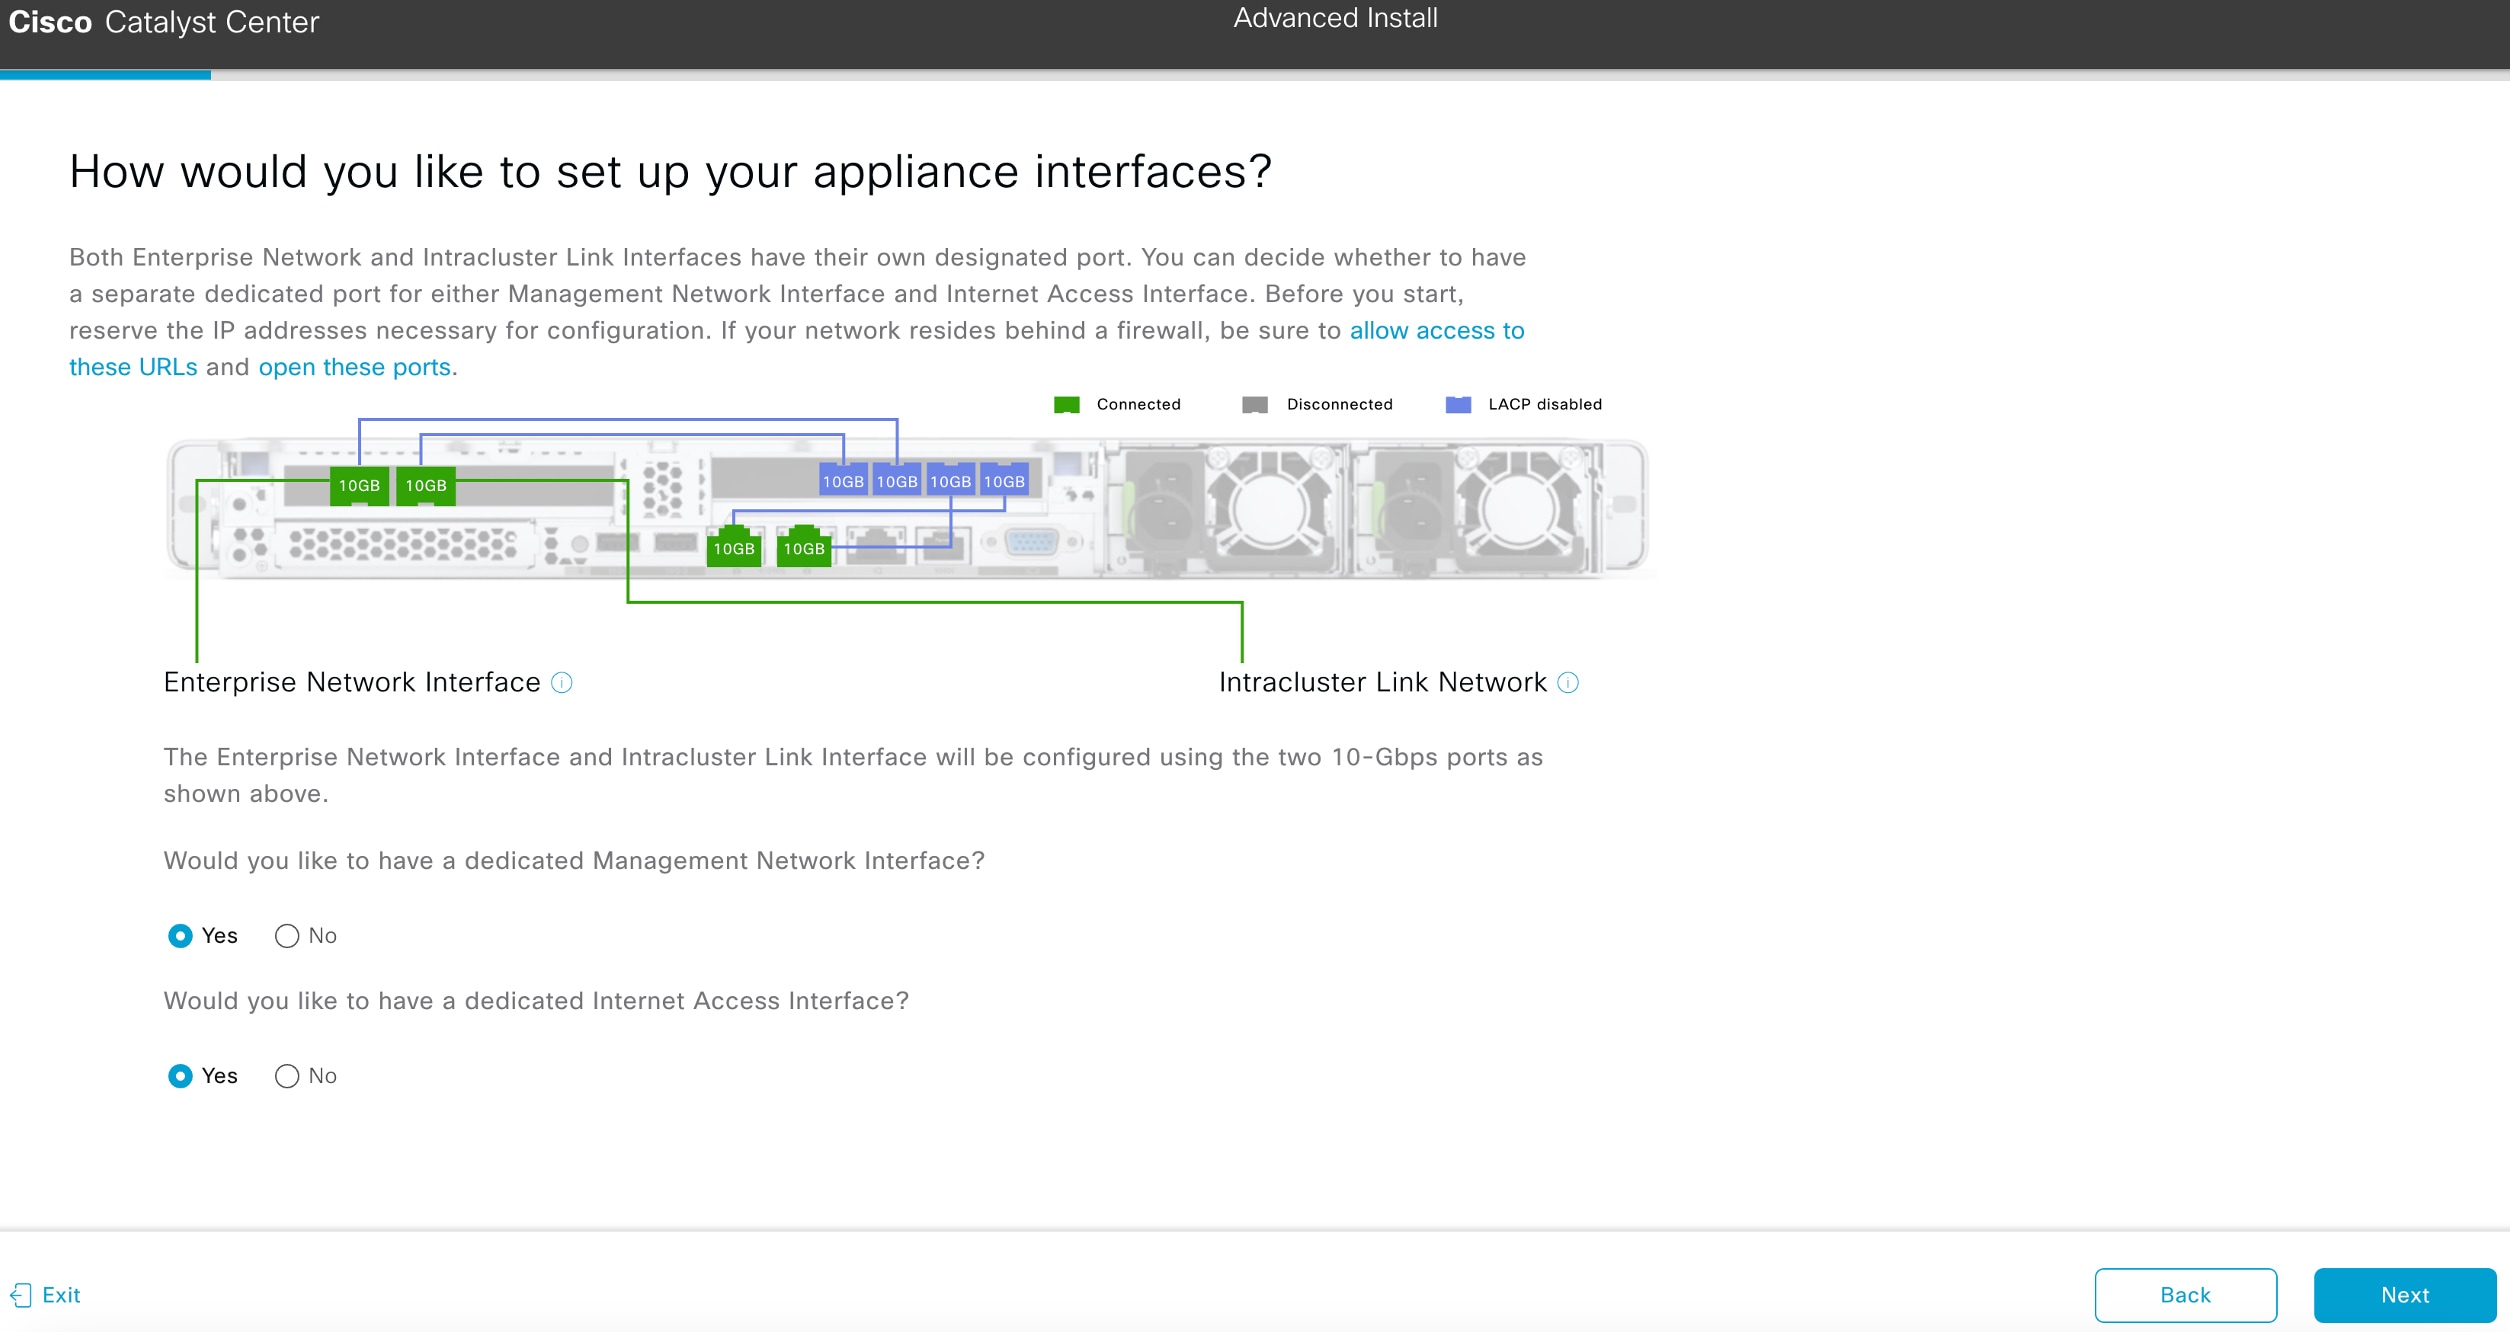 The How would you like to set up your appliance interfaces? screen displays the step to choose if you want to configure dedicated Management and Internet Access interfaces.